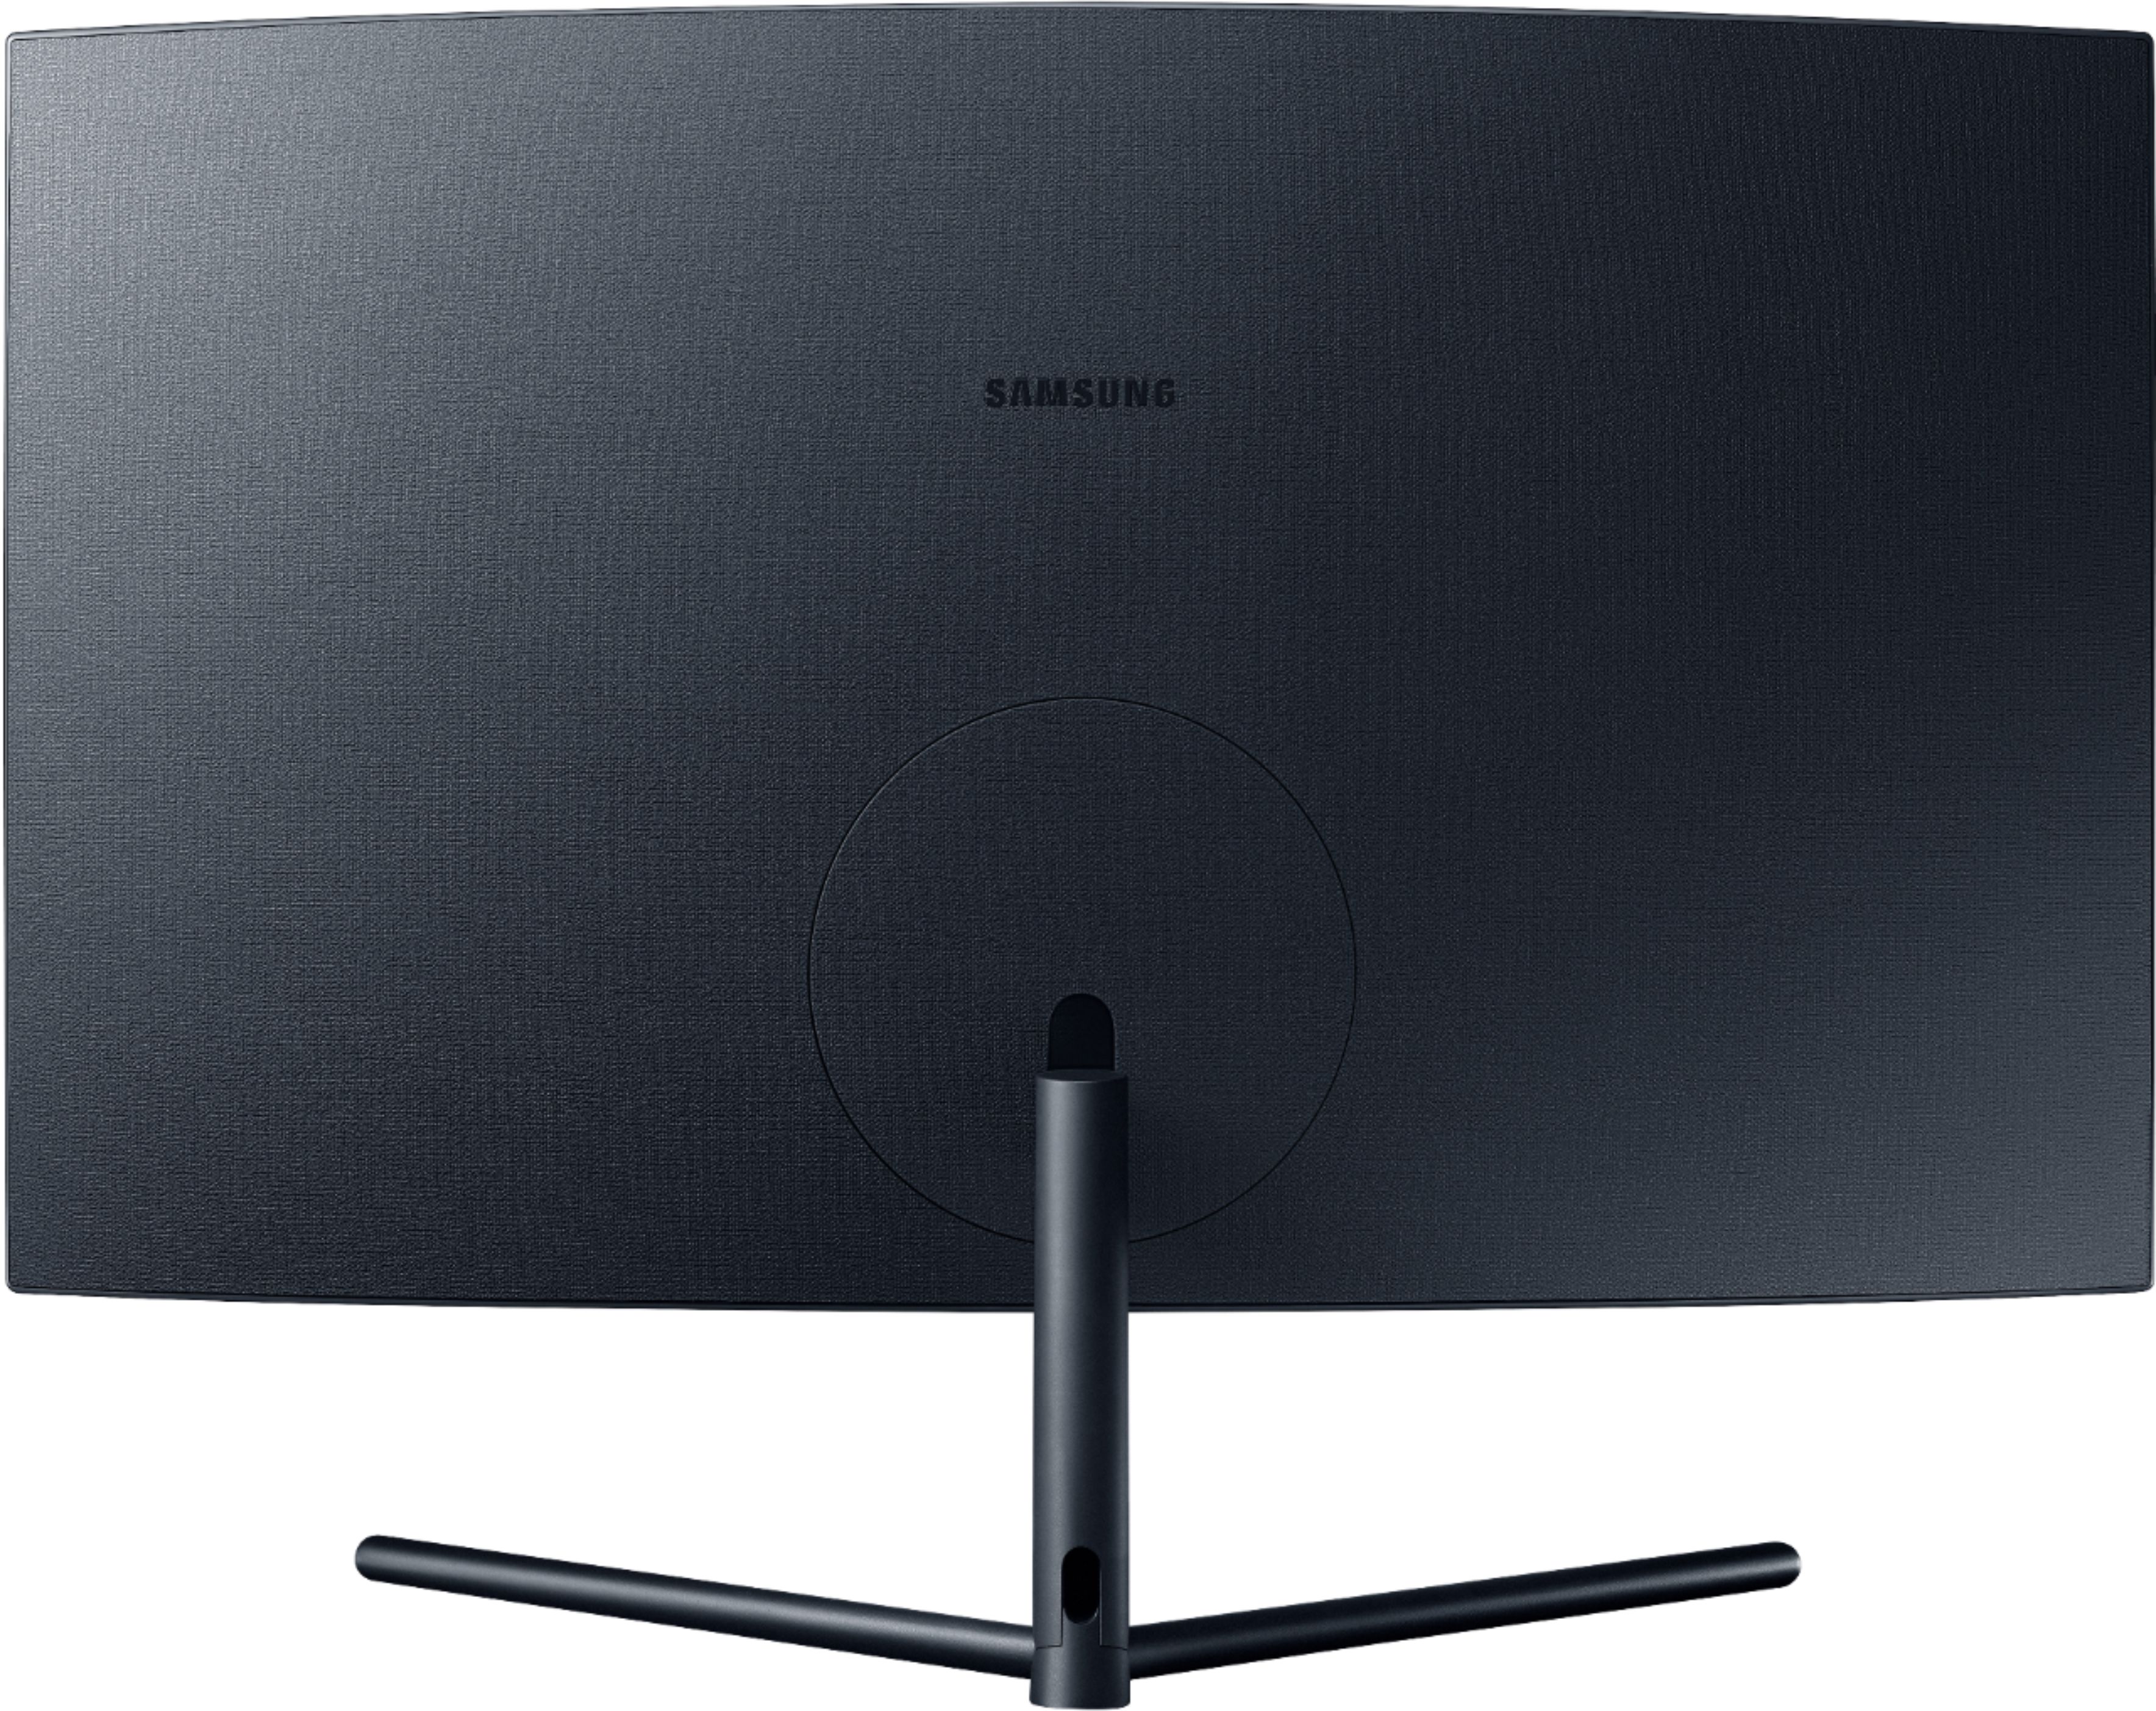 Back View: Samsung - S80A Series 27” UHD Monitor with HDR (HDMI, USB) - Black